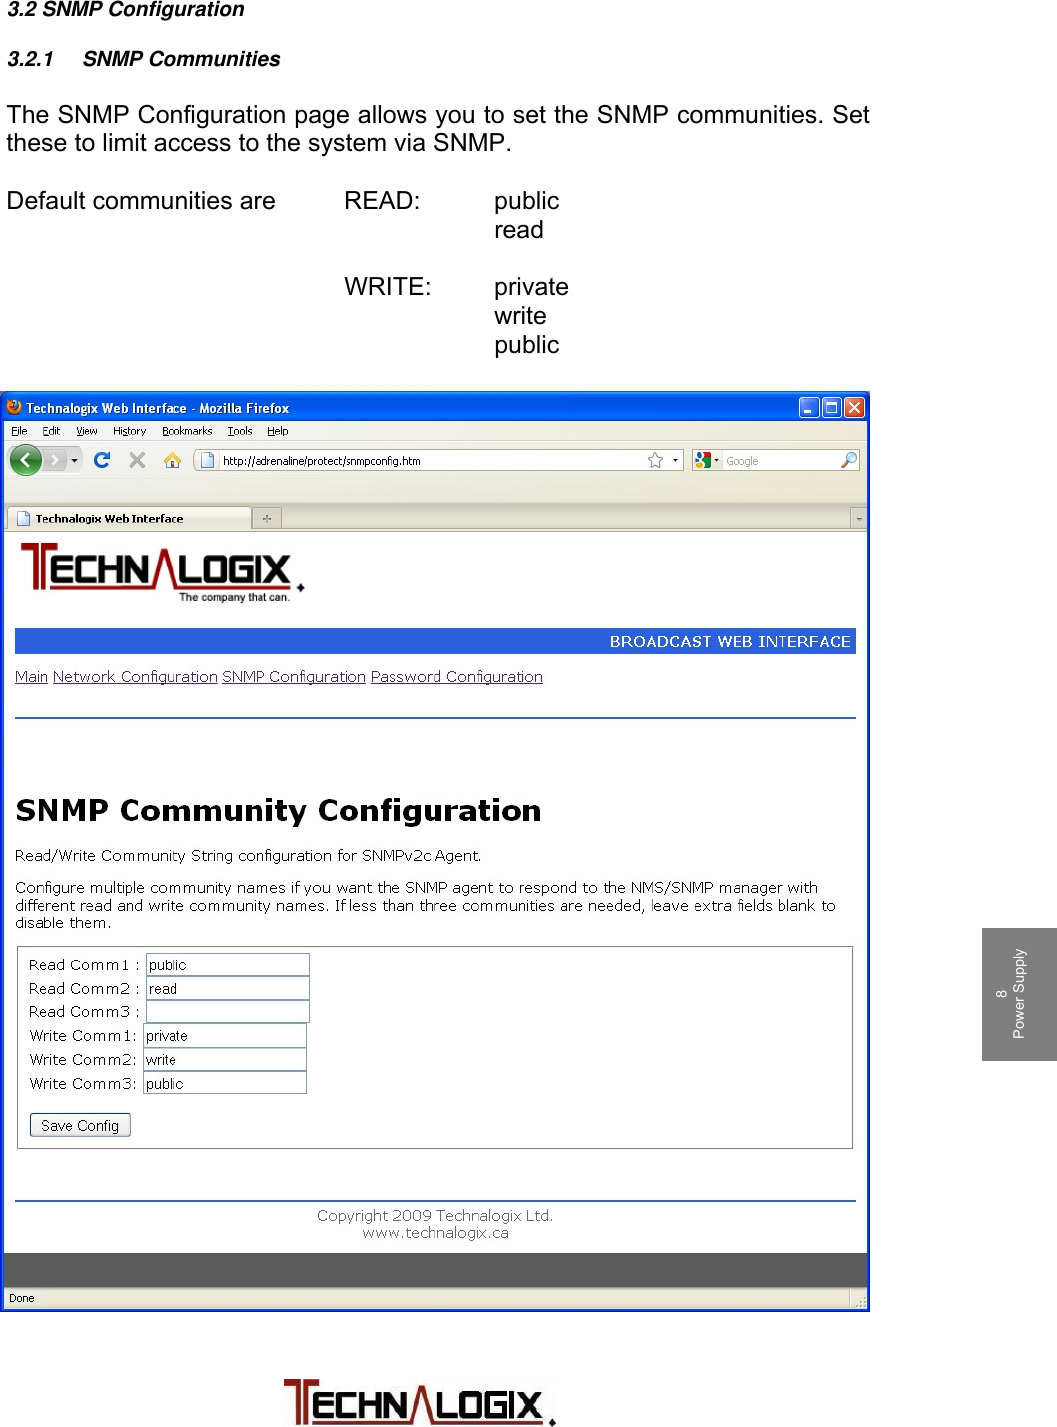         1 Safeguards  2 Terms and Warranty 3 Principle of Operation 4 Installation 5 Operation 6 Control System 7 RF Components 8 Power Supply 9 Maintenance 10 Troubleshooting 3.2 SNMP Configuration  3.2.1 SNMP Communities  The SNMP Configuration page allows you to set the SNMP communities. Set these to limit access to the system via SNMP.    Default communities are    READ:  public     read         WRITE: private        write        public 